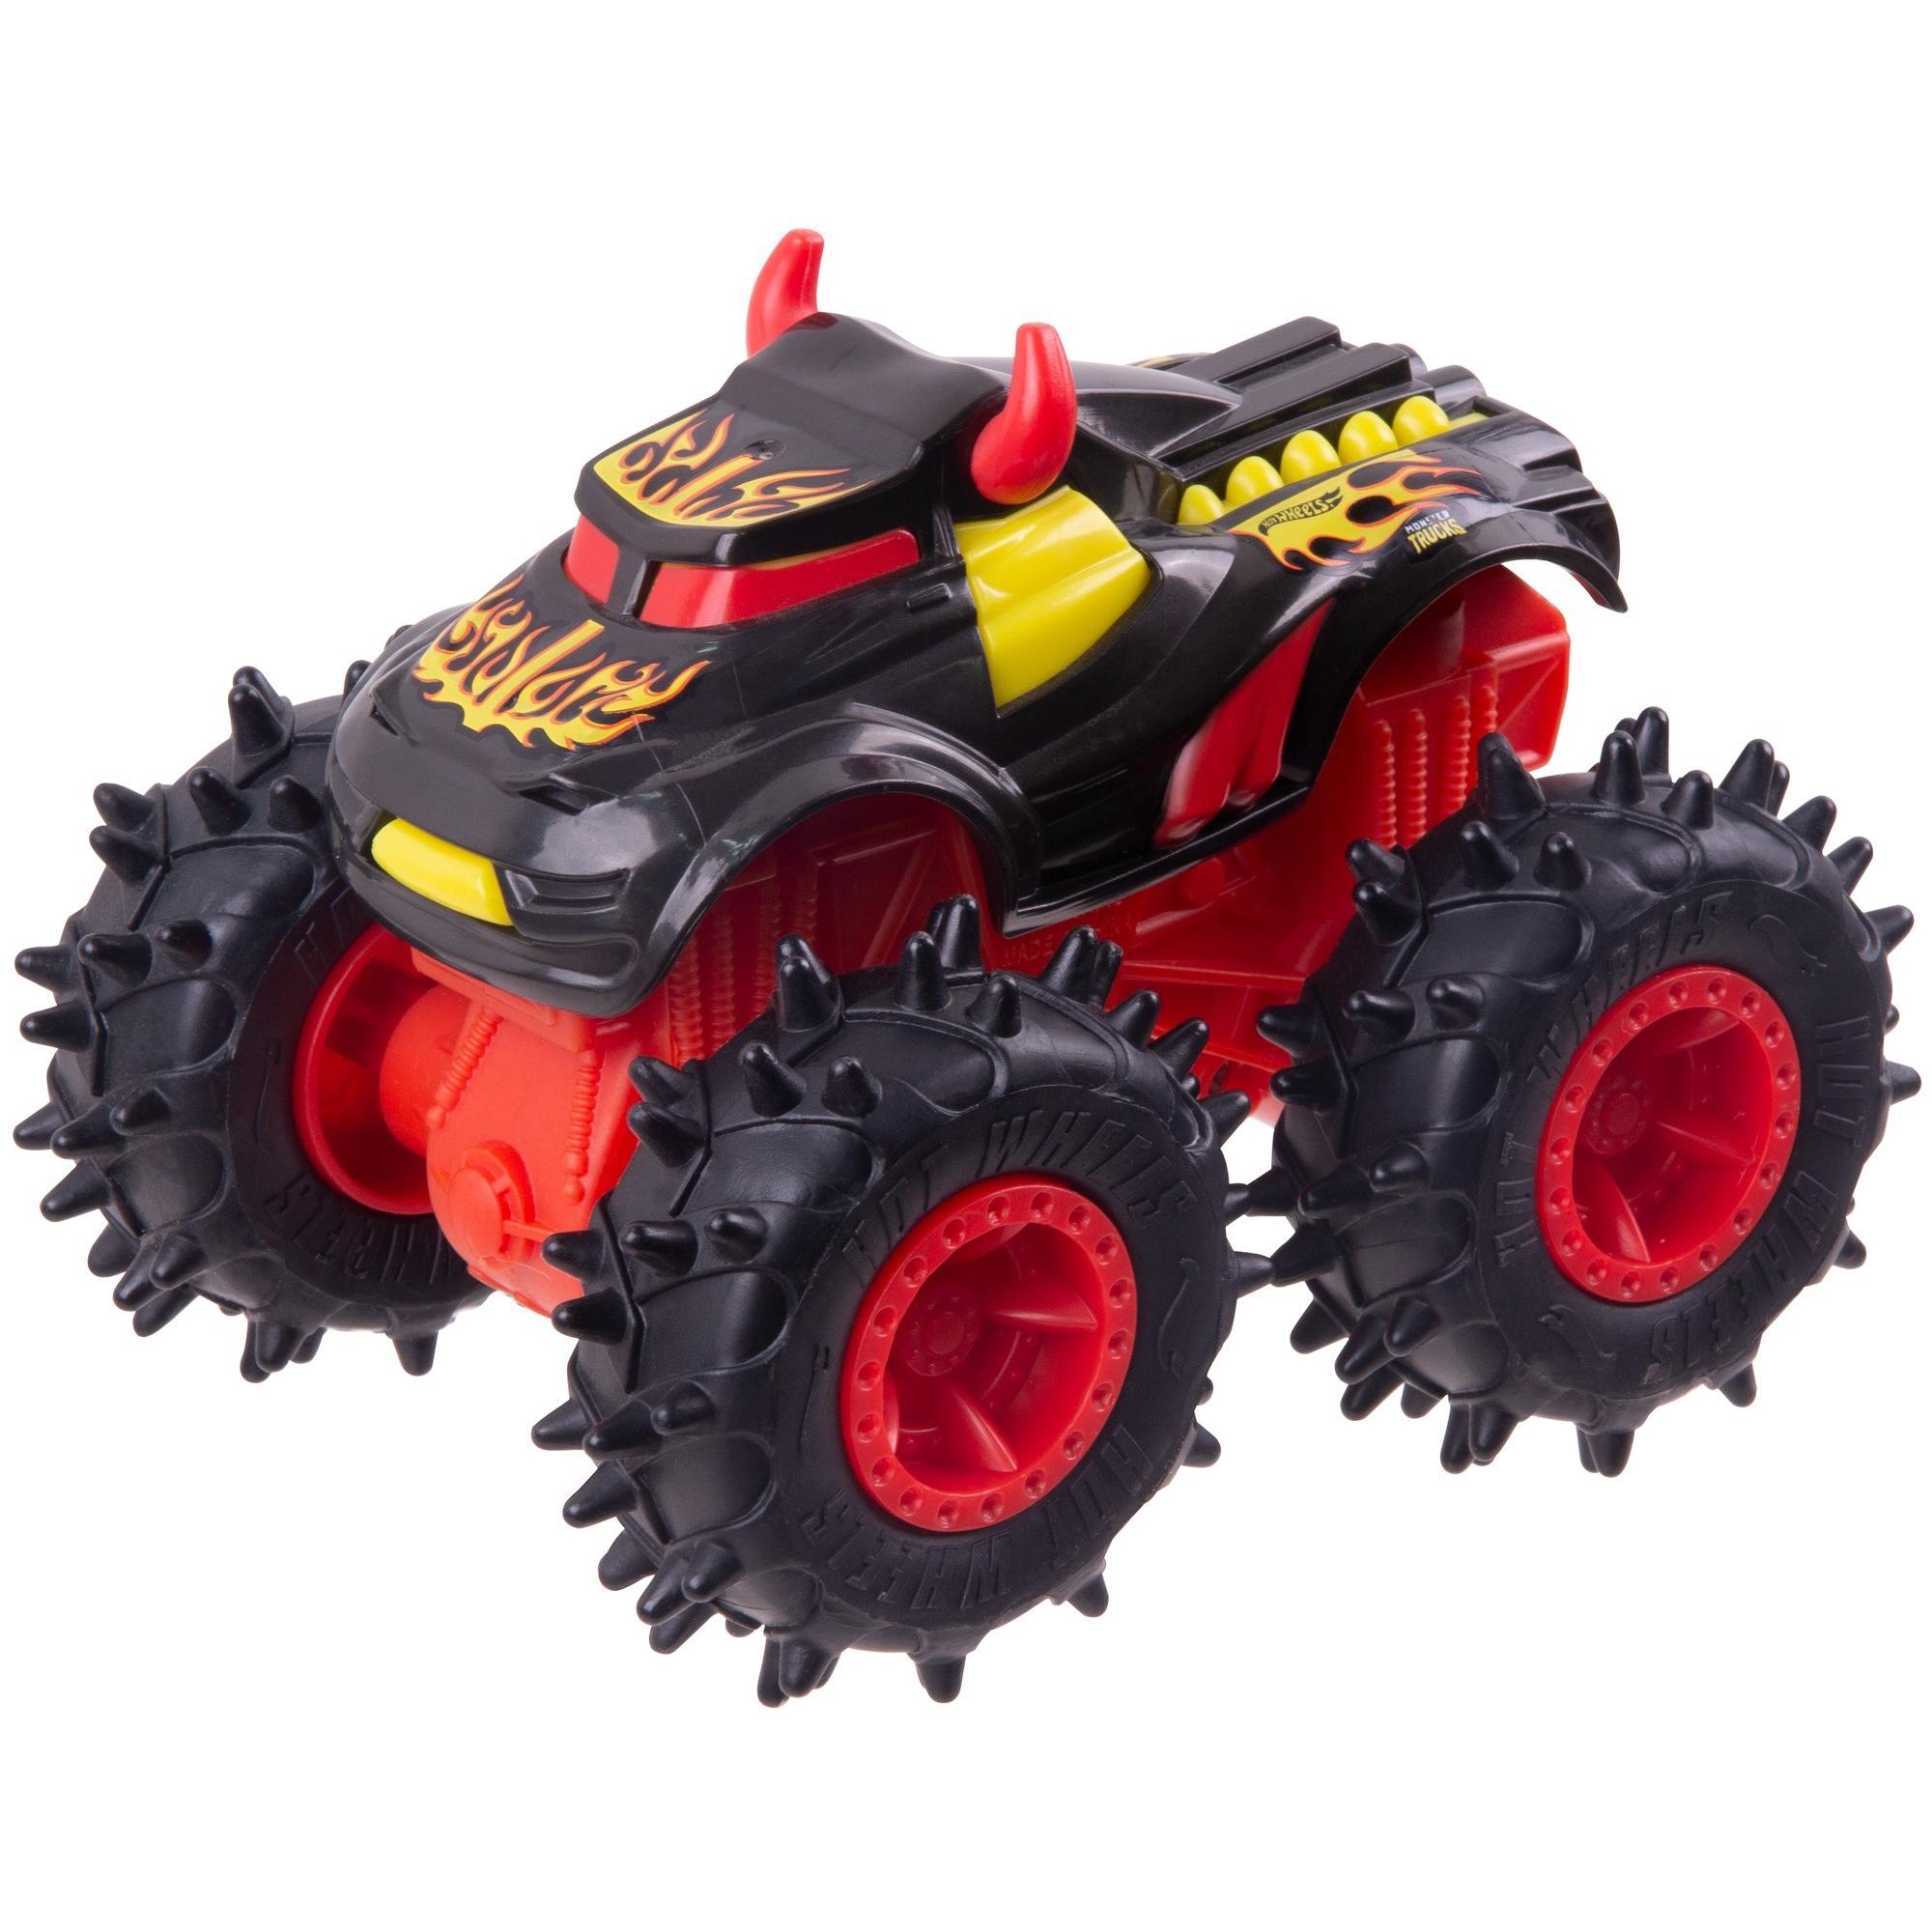 Monster Trucks By Hot Wheels 1:43 Scale Vehicle (Styles May Vary) - image 1 of 9